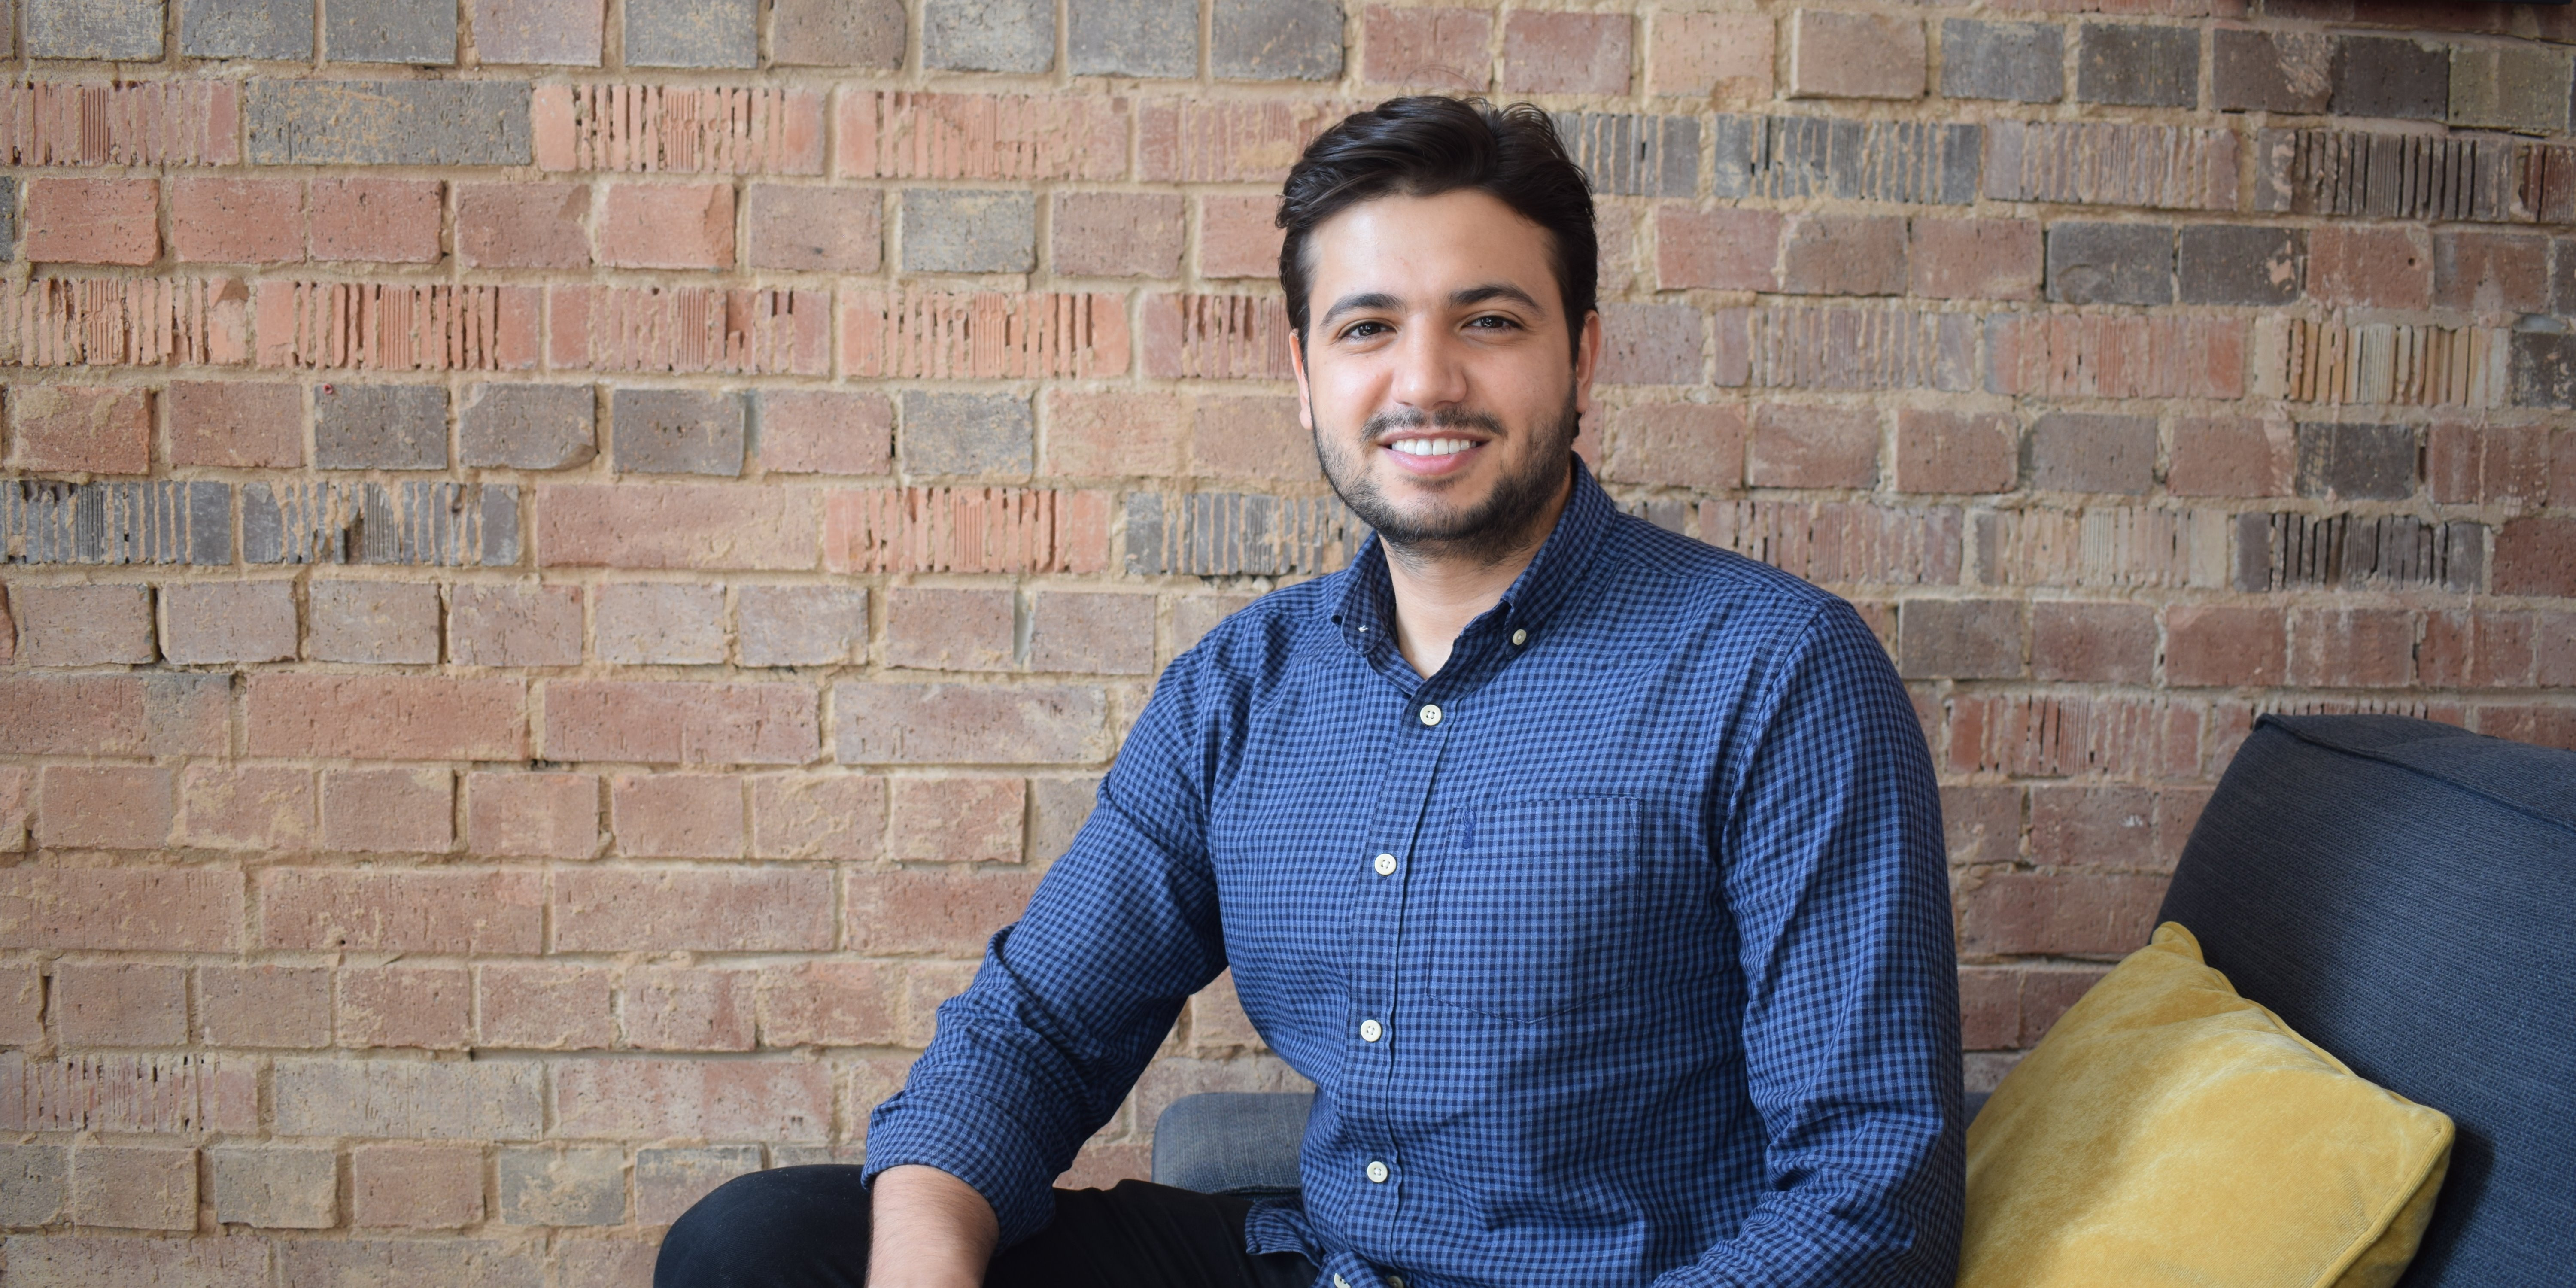 Meet Mazen, one of our Cooper project startups